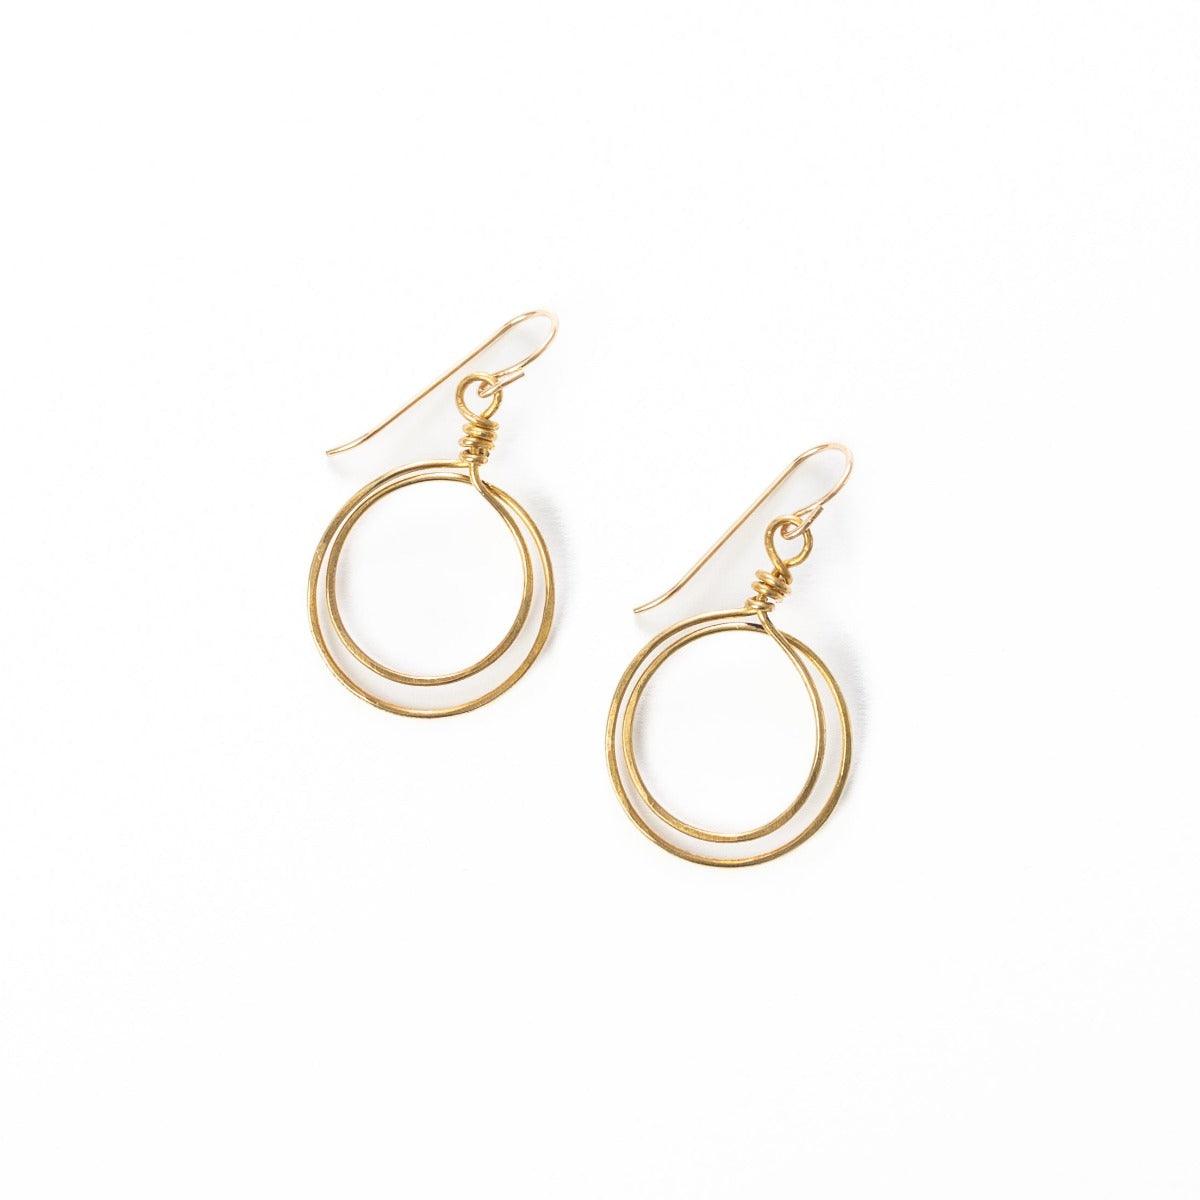 Zomi Circles of Unity Earrings in Gold - Forai